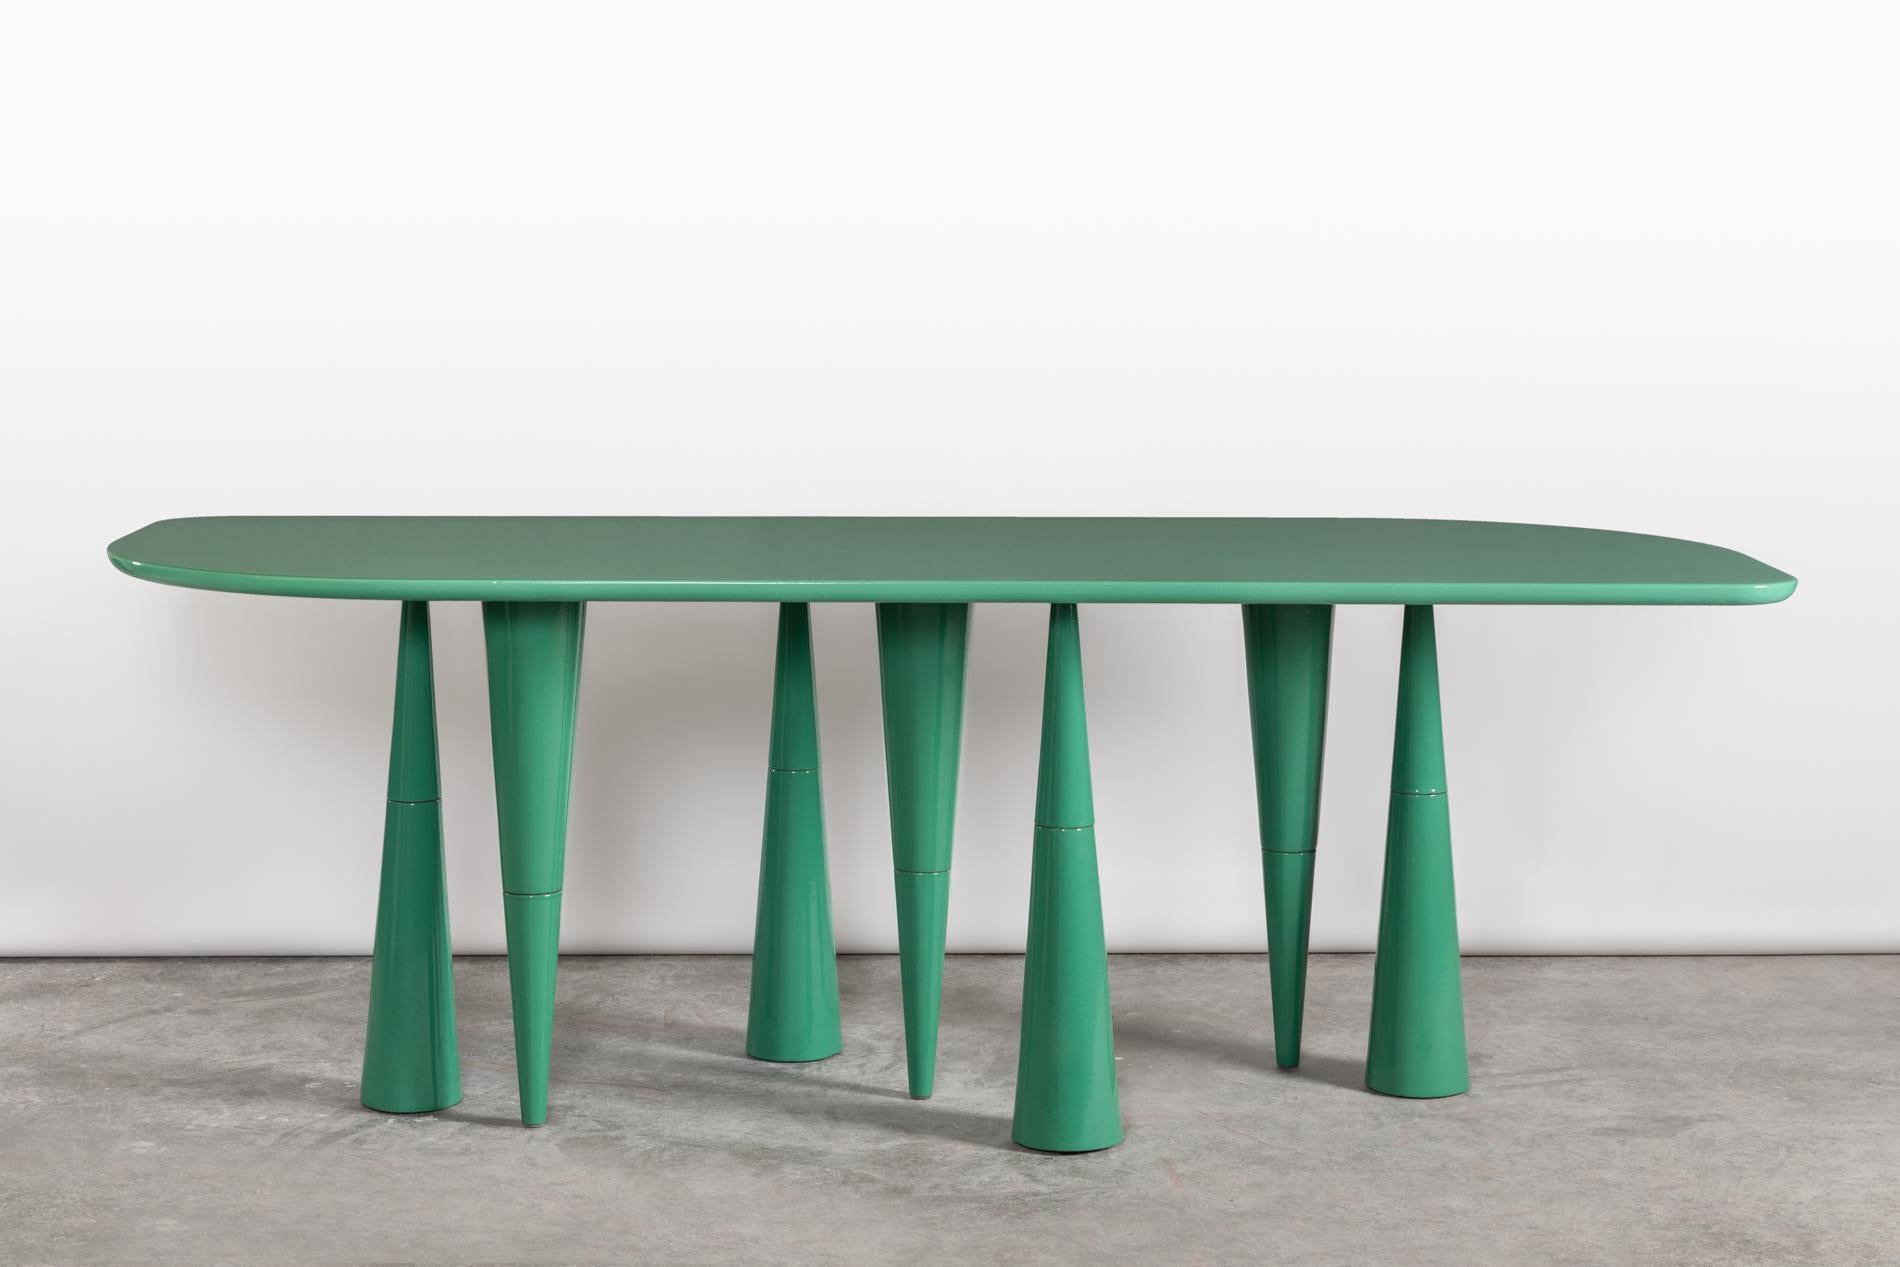 Silvette limited edition dining table by Moure Studio
Limited Edition of 8
Dimensions: D 80 x W 40 x H 80 cm
Materials: Enameled lava stone
Also available in different colours.

Dining table made of enameled lavastone. Silvette translates its